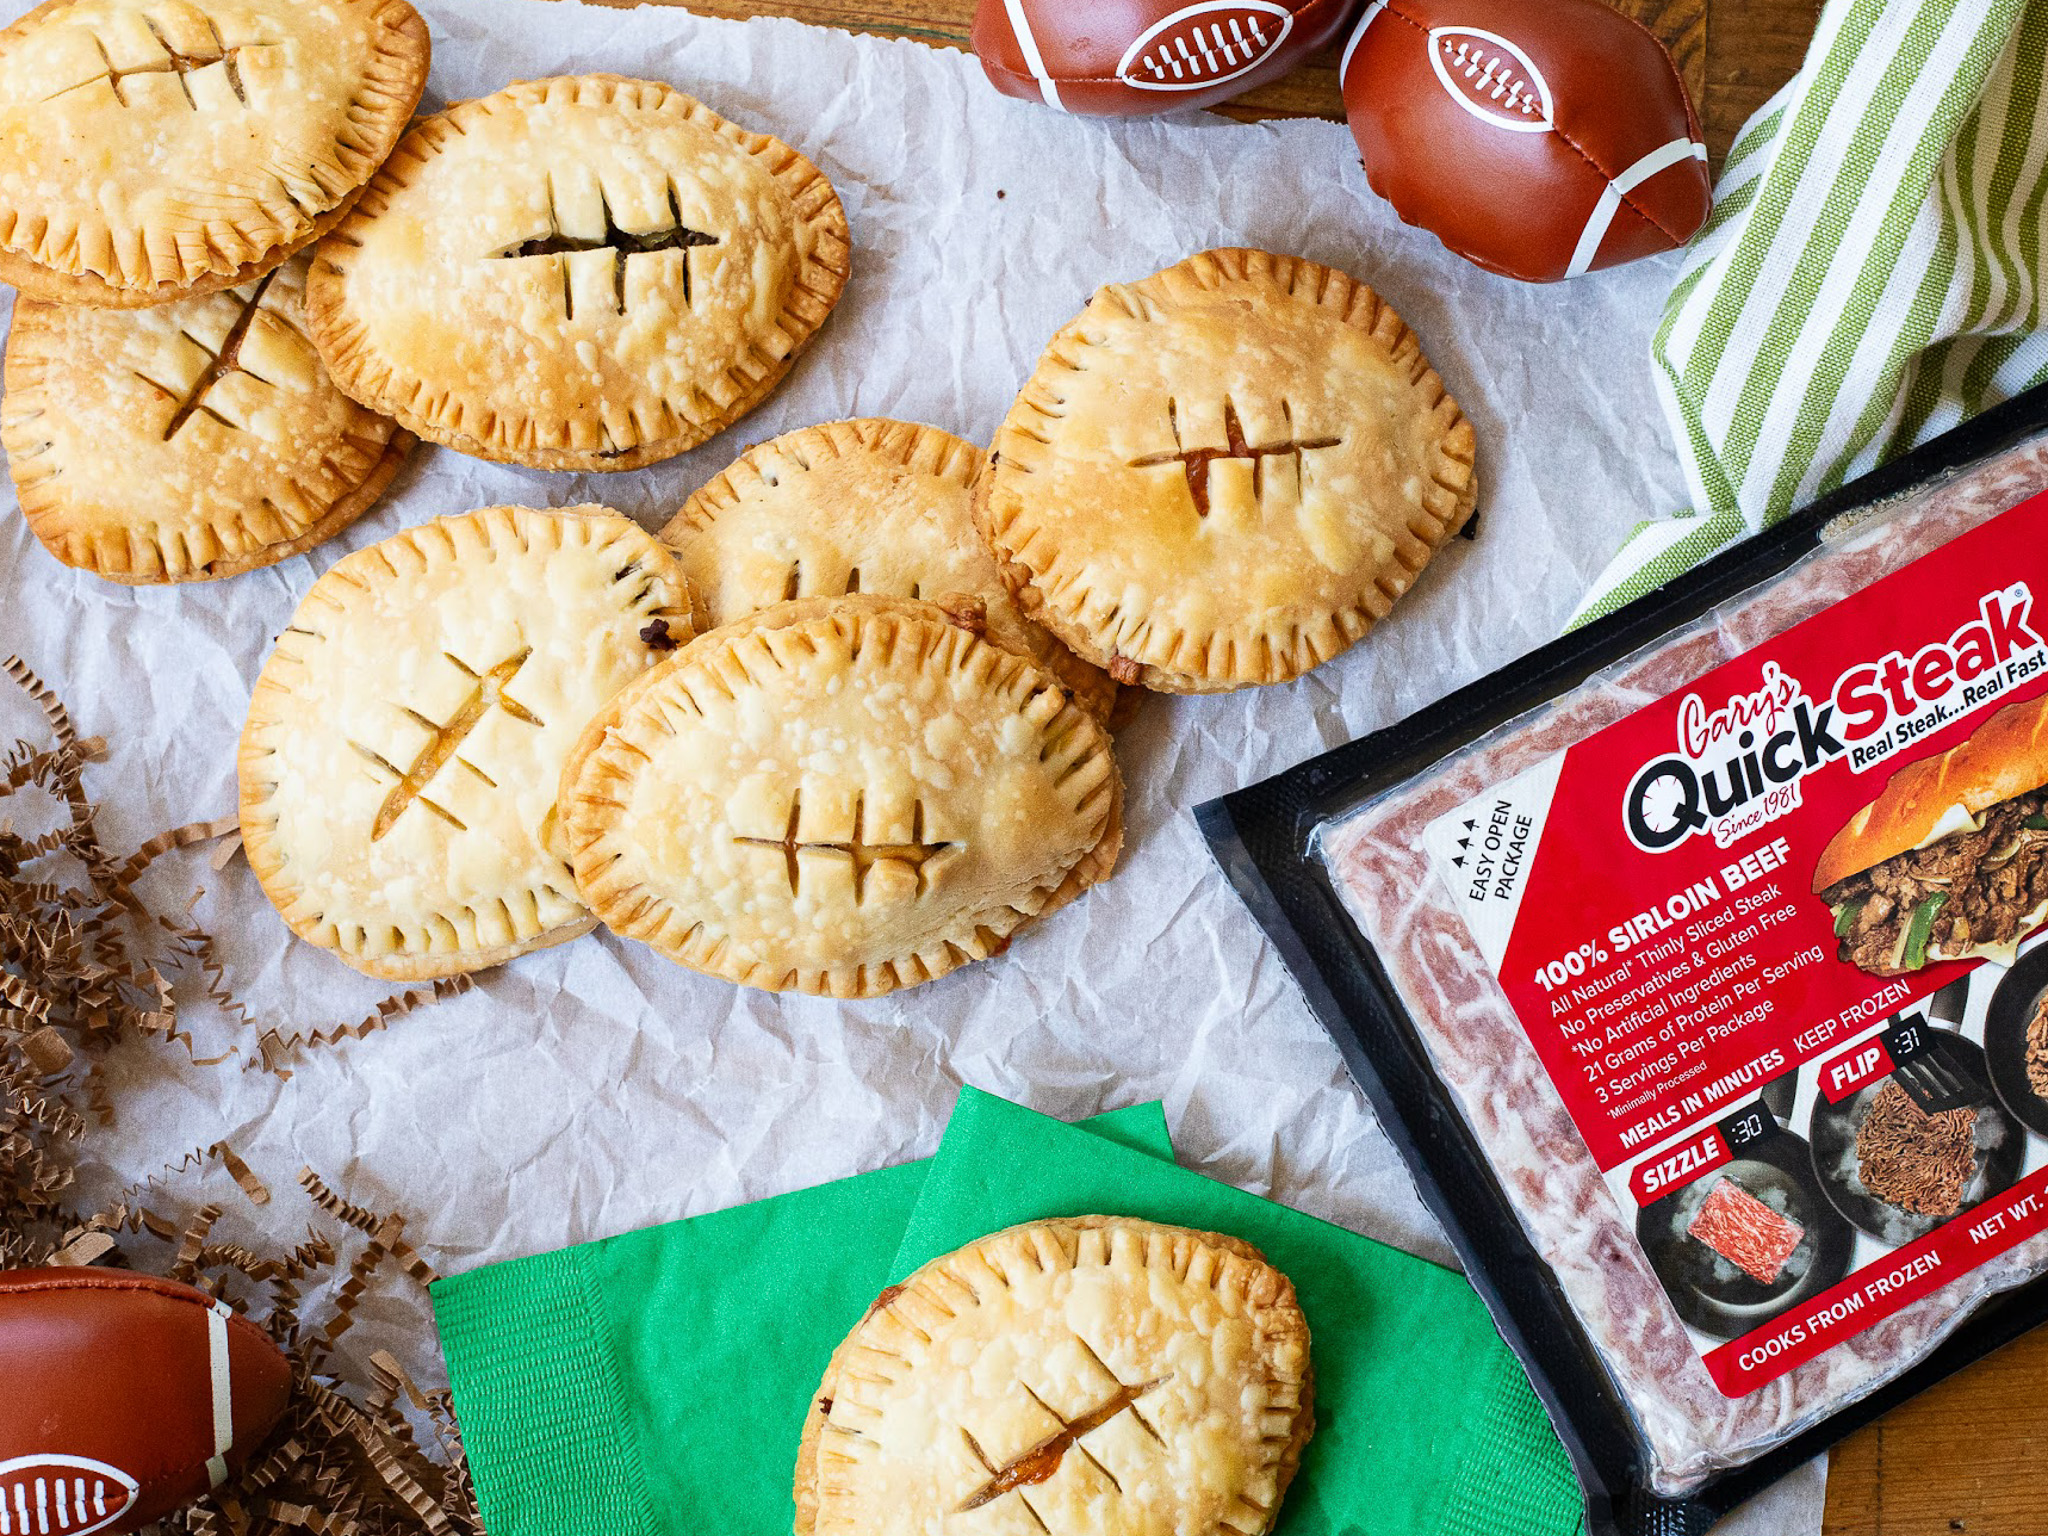 Gary’s QuickSteak Is Ideal For Tasty Game Day Snacks – Save NOW At Publix